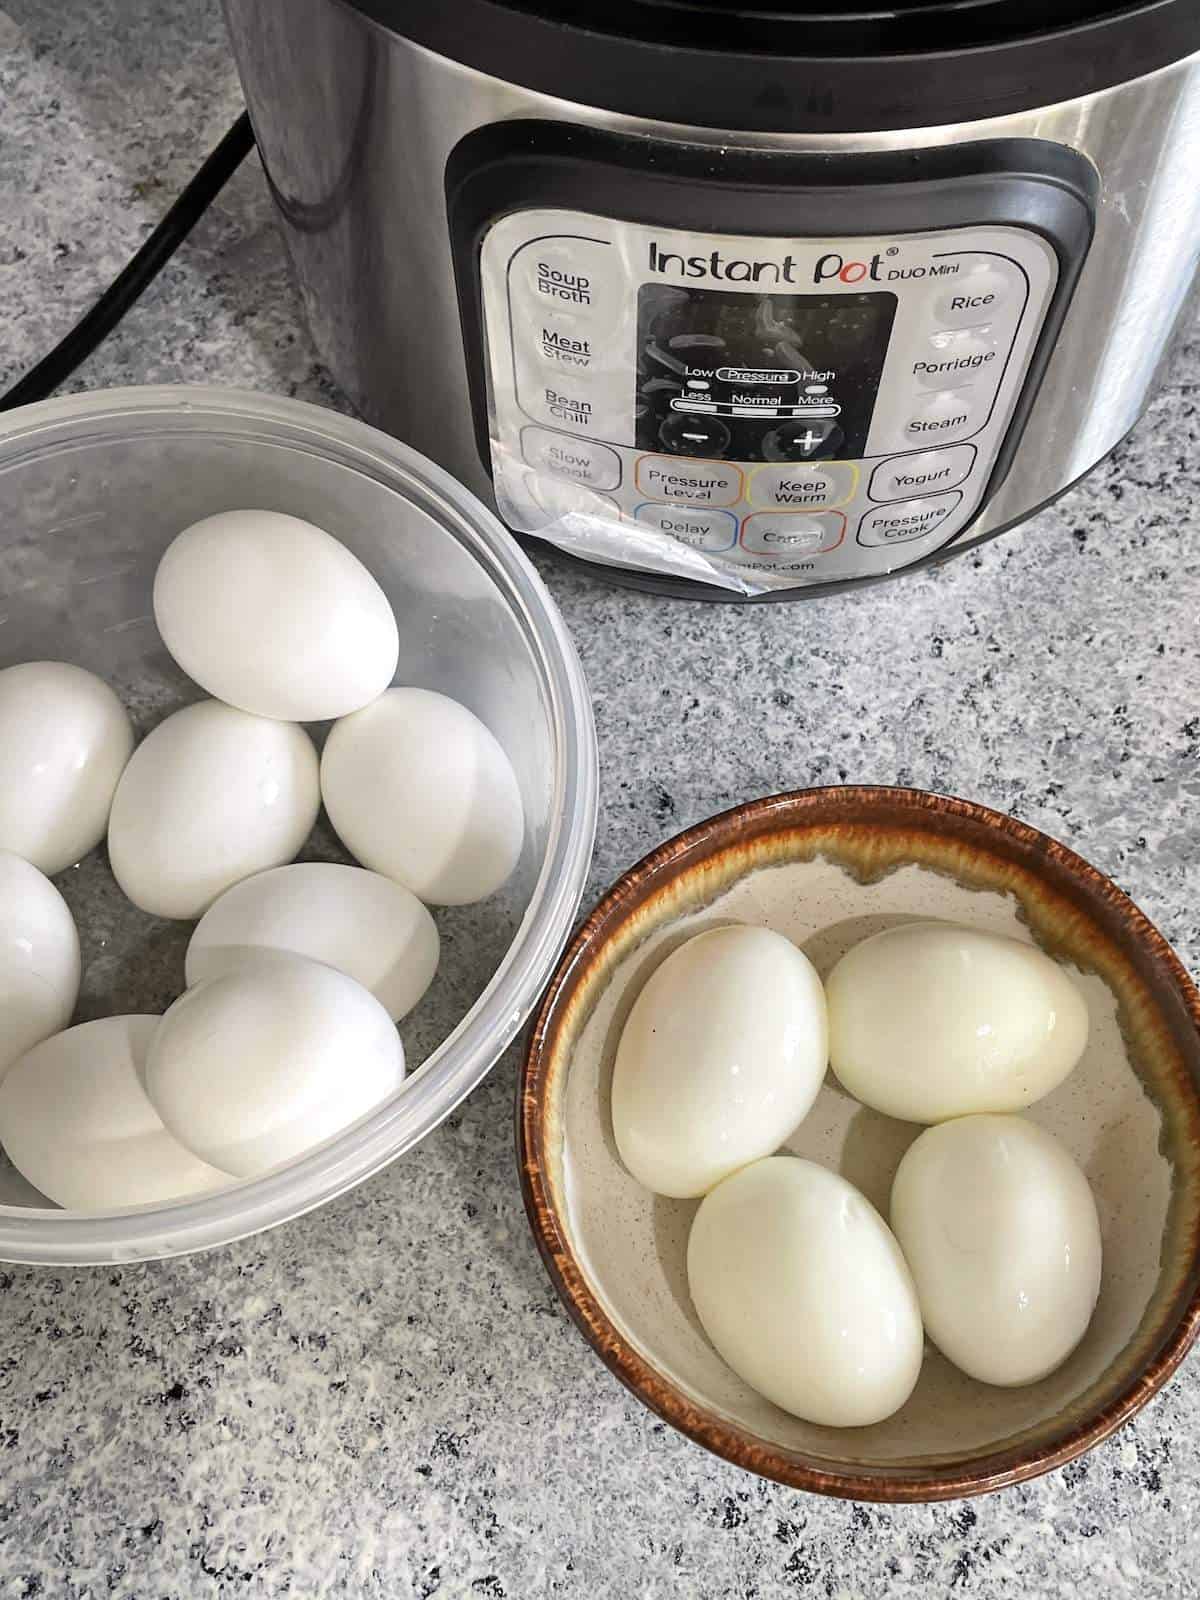 An instant pot next to a bowl of hard boiled eggs, some peeled and some in their shell.